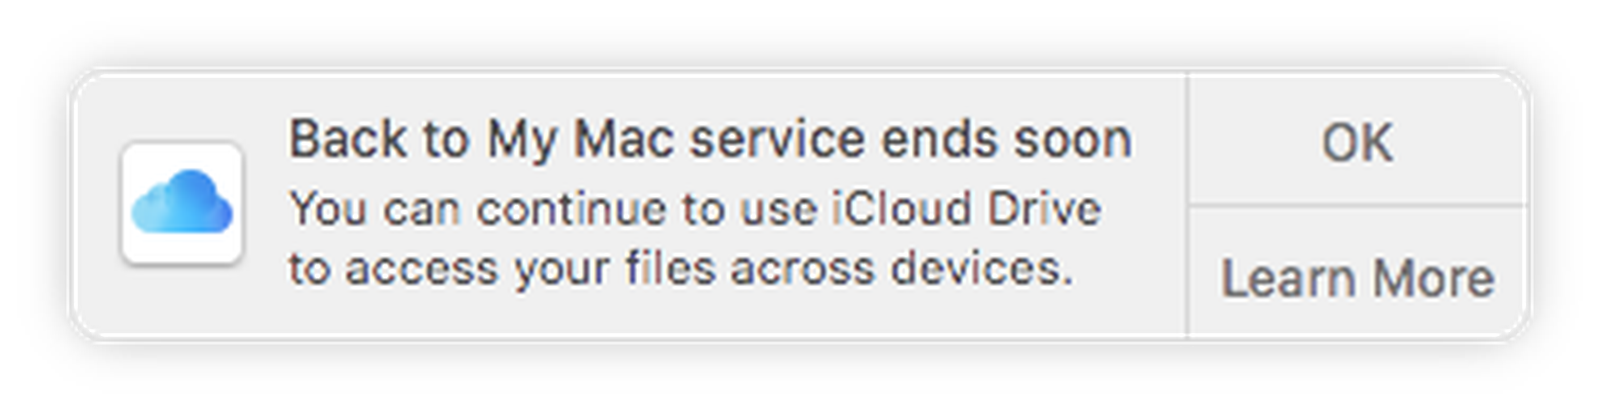 what is back to my mac service